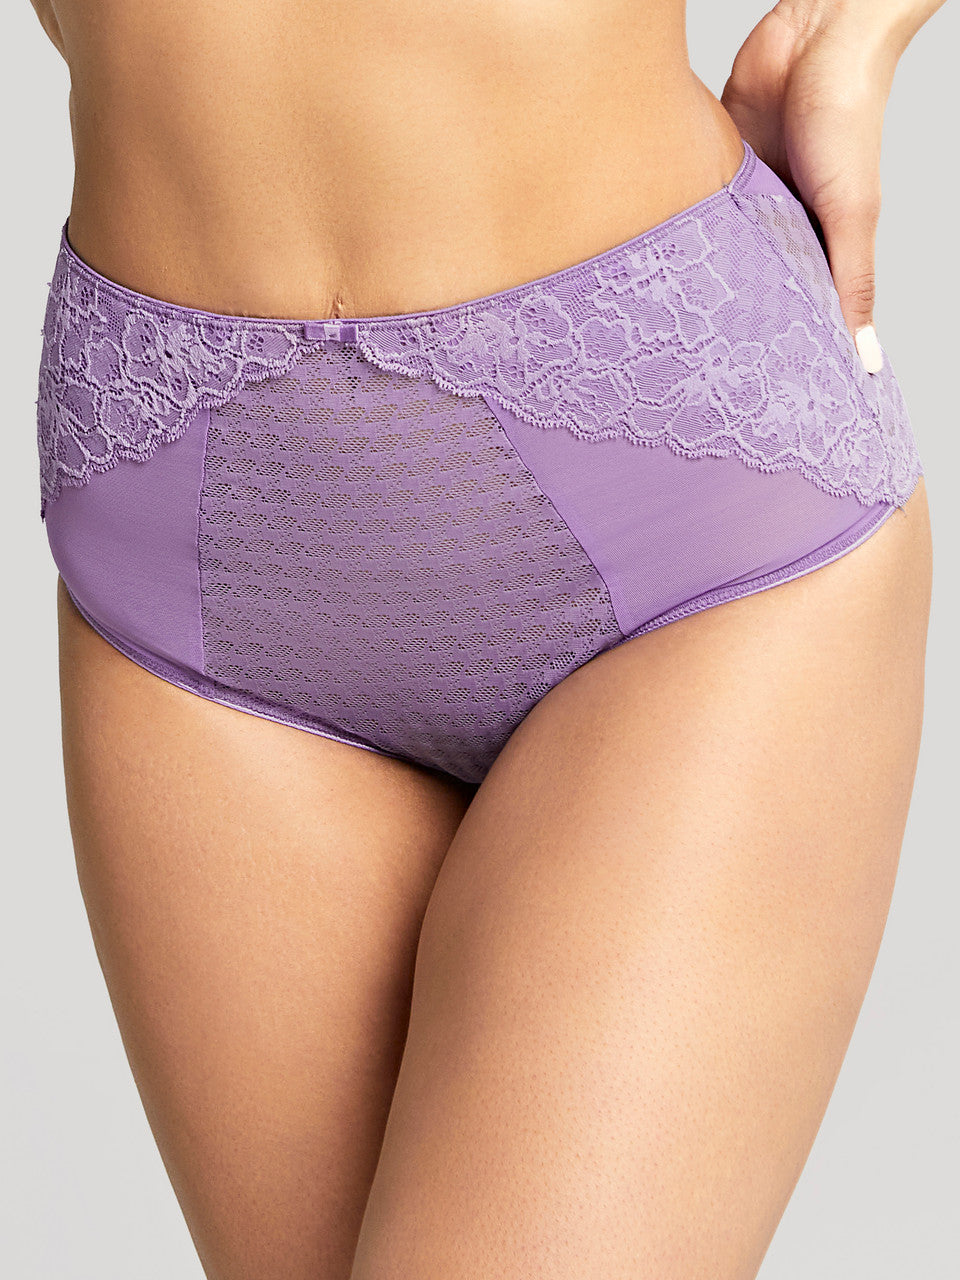 Envy Deep Brief - Violet, worn by model, front view